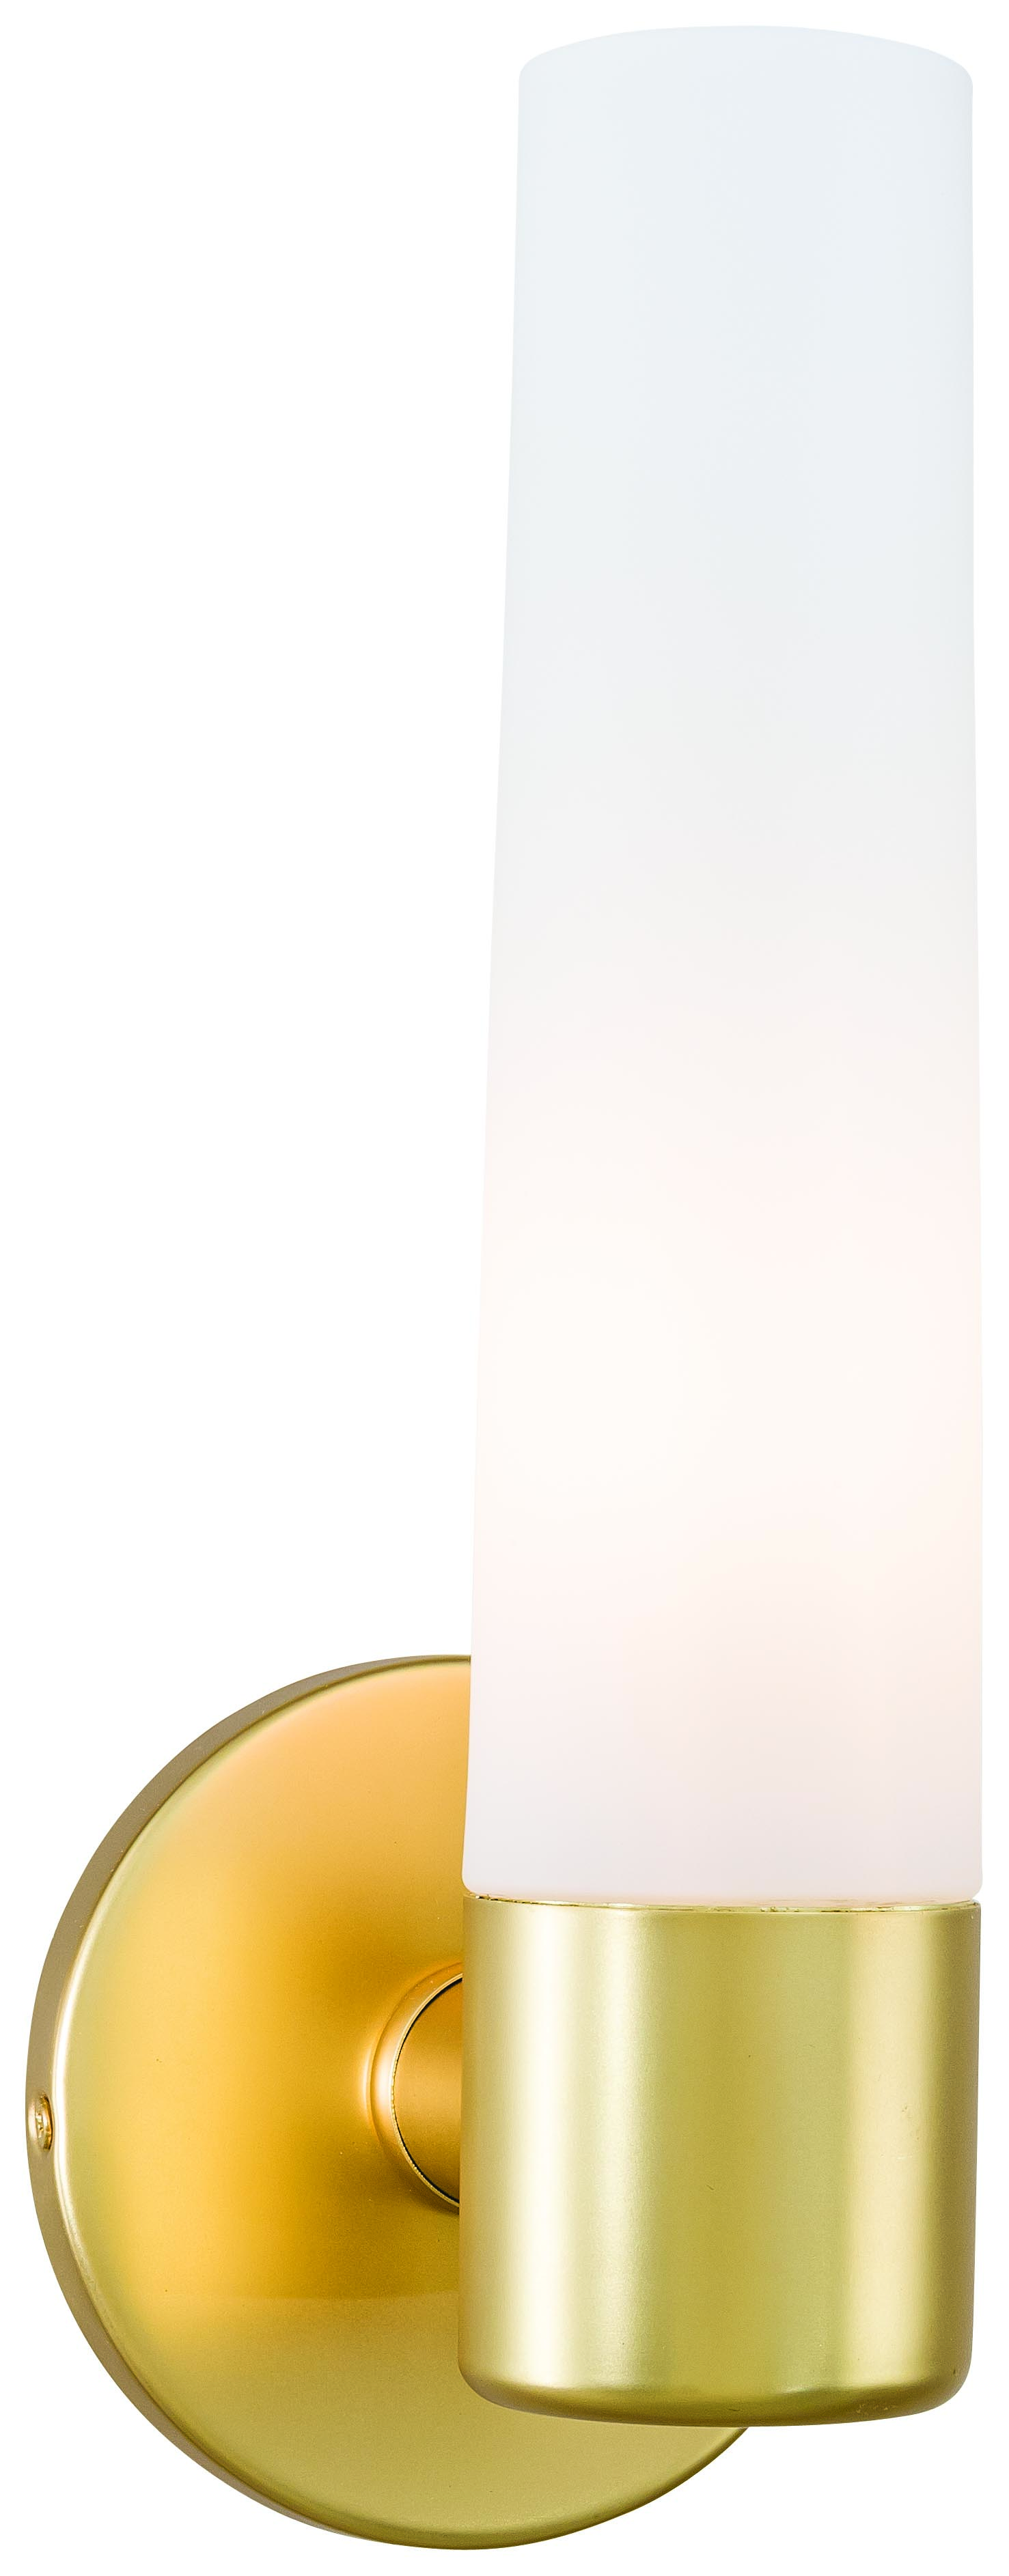 George Kovacs Saber Light Wall Sconce in Honey Gold, P5041-248 The Light  Brothers